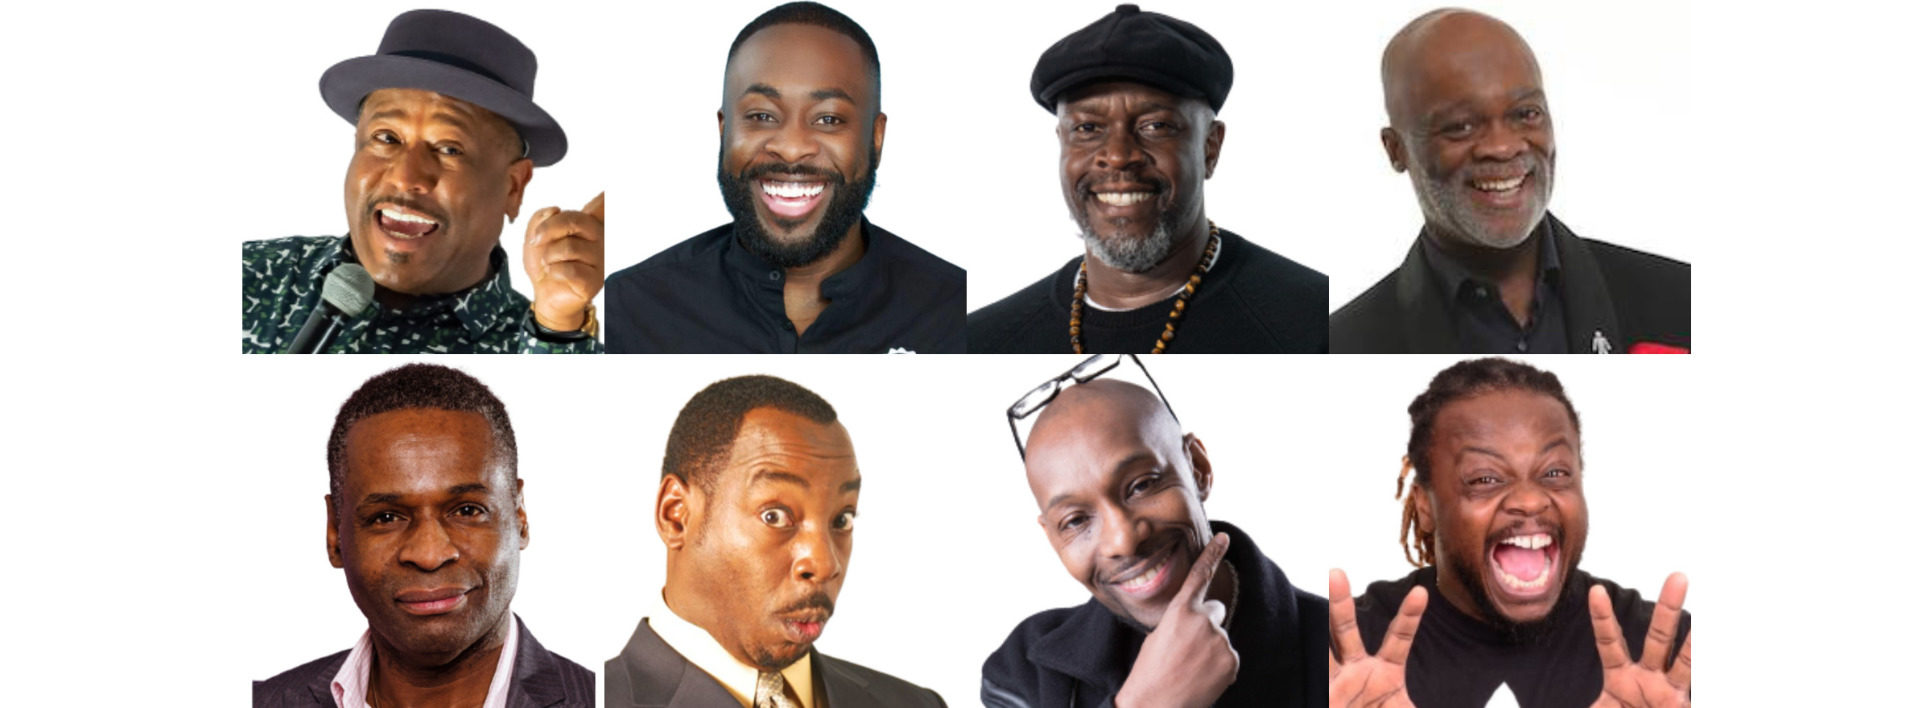 Legends Of Comedy London Show